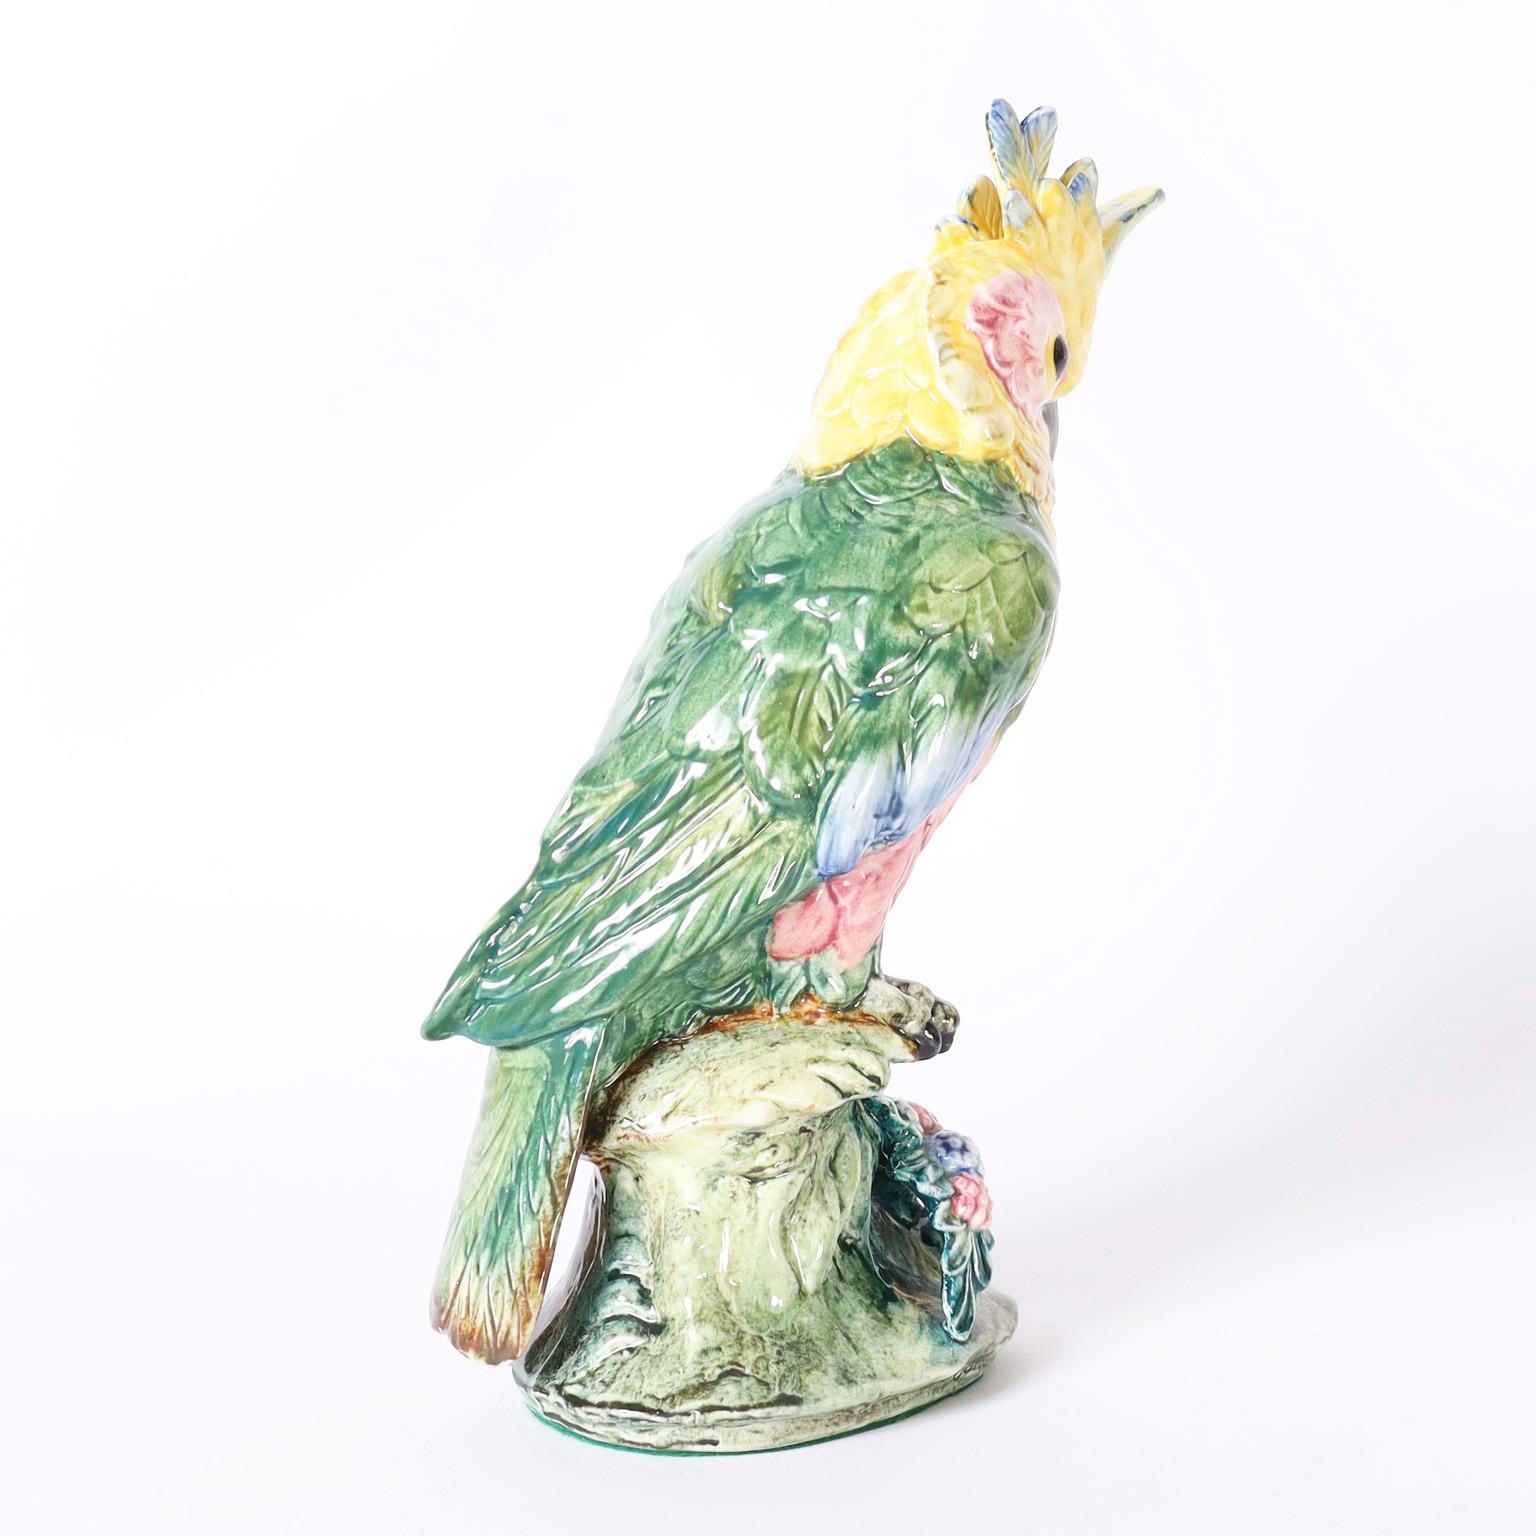 Other Pair of Vintage Porcelain Birds or Cockatoos by Stangl